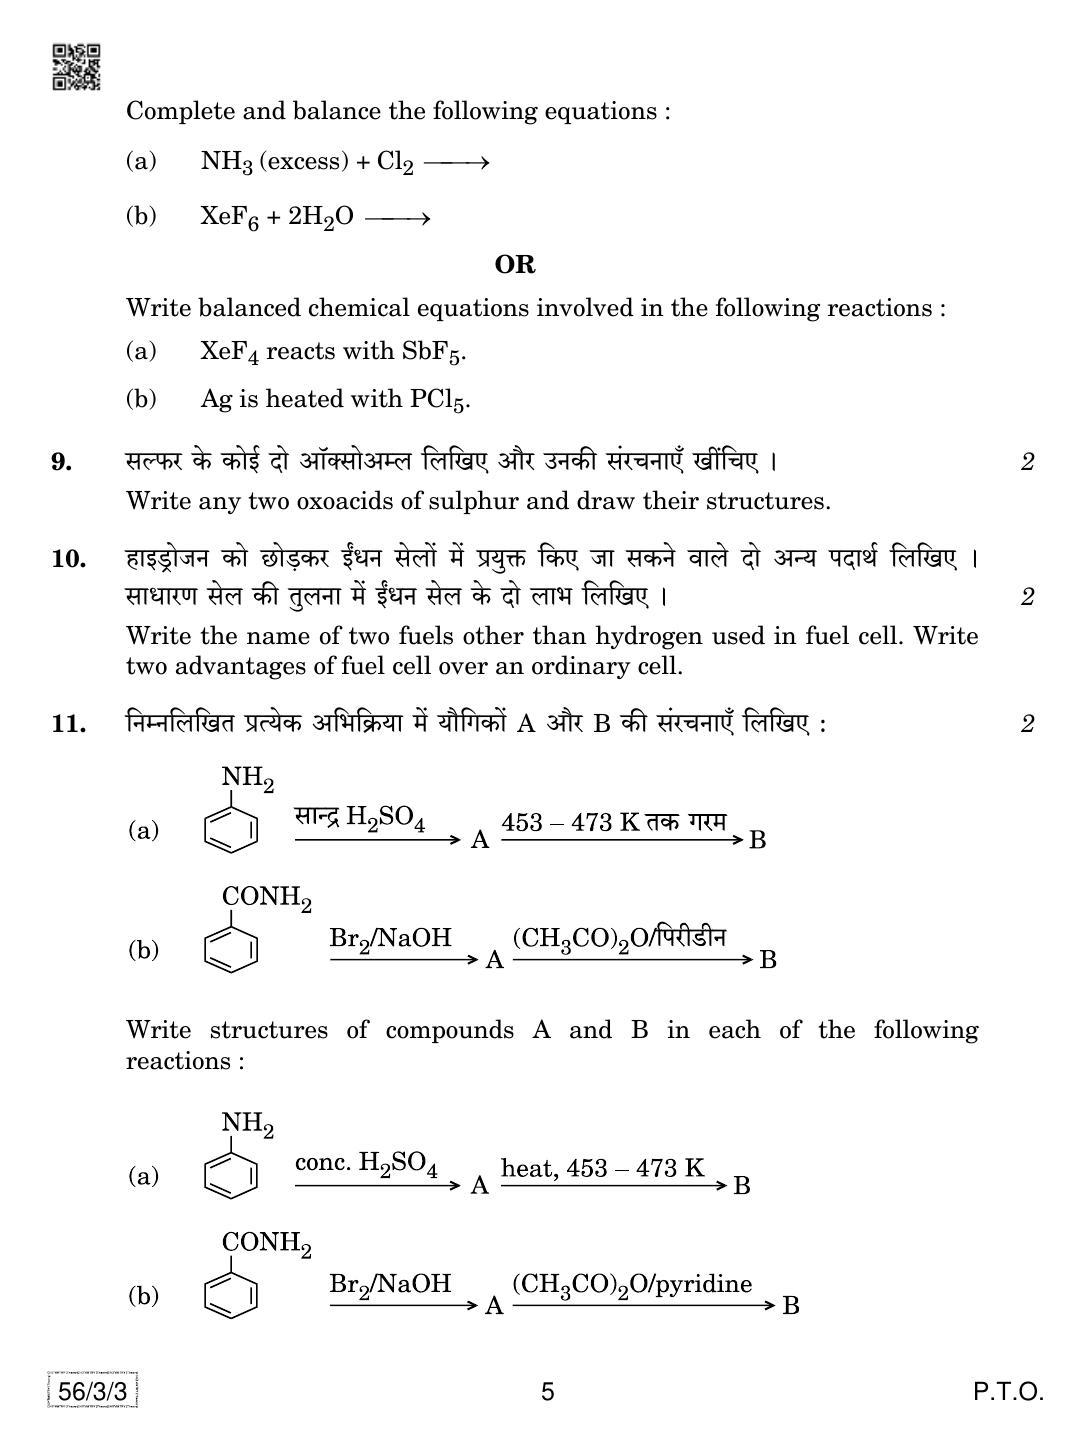 CBSE Class 12 56-3-3 Chemistry 2019 Question Paper - Page 5